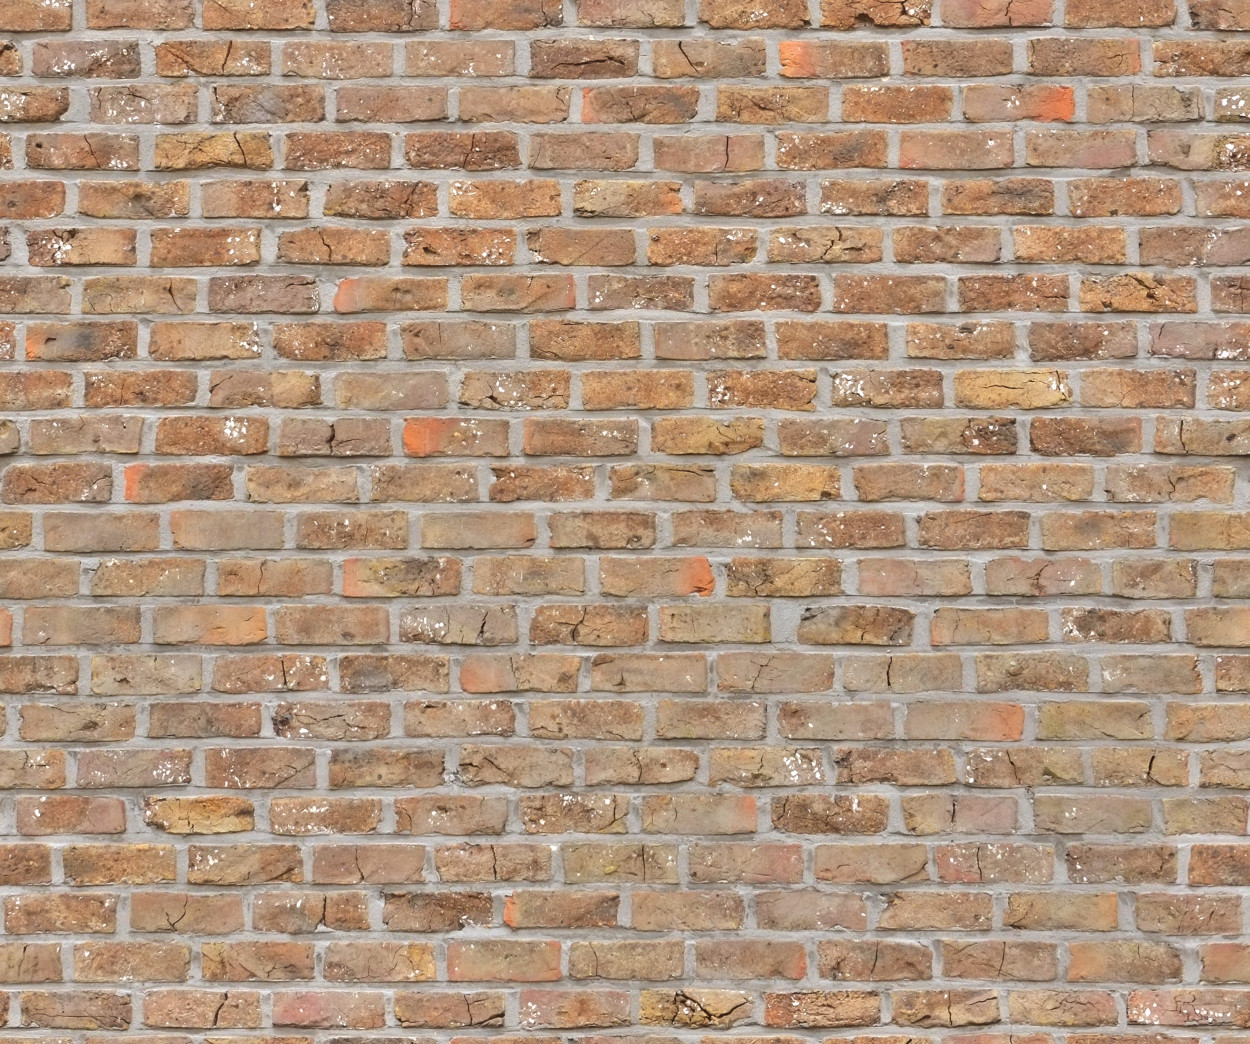 A seamless rough handmade brick texture for use in architectural drawings and 3D models